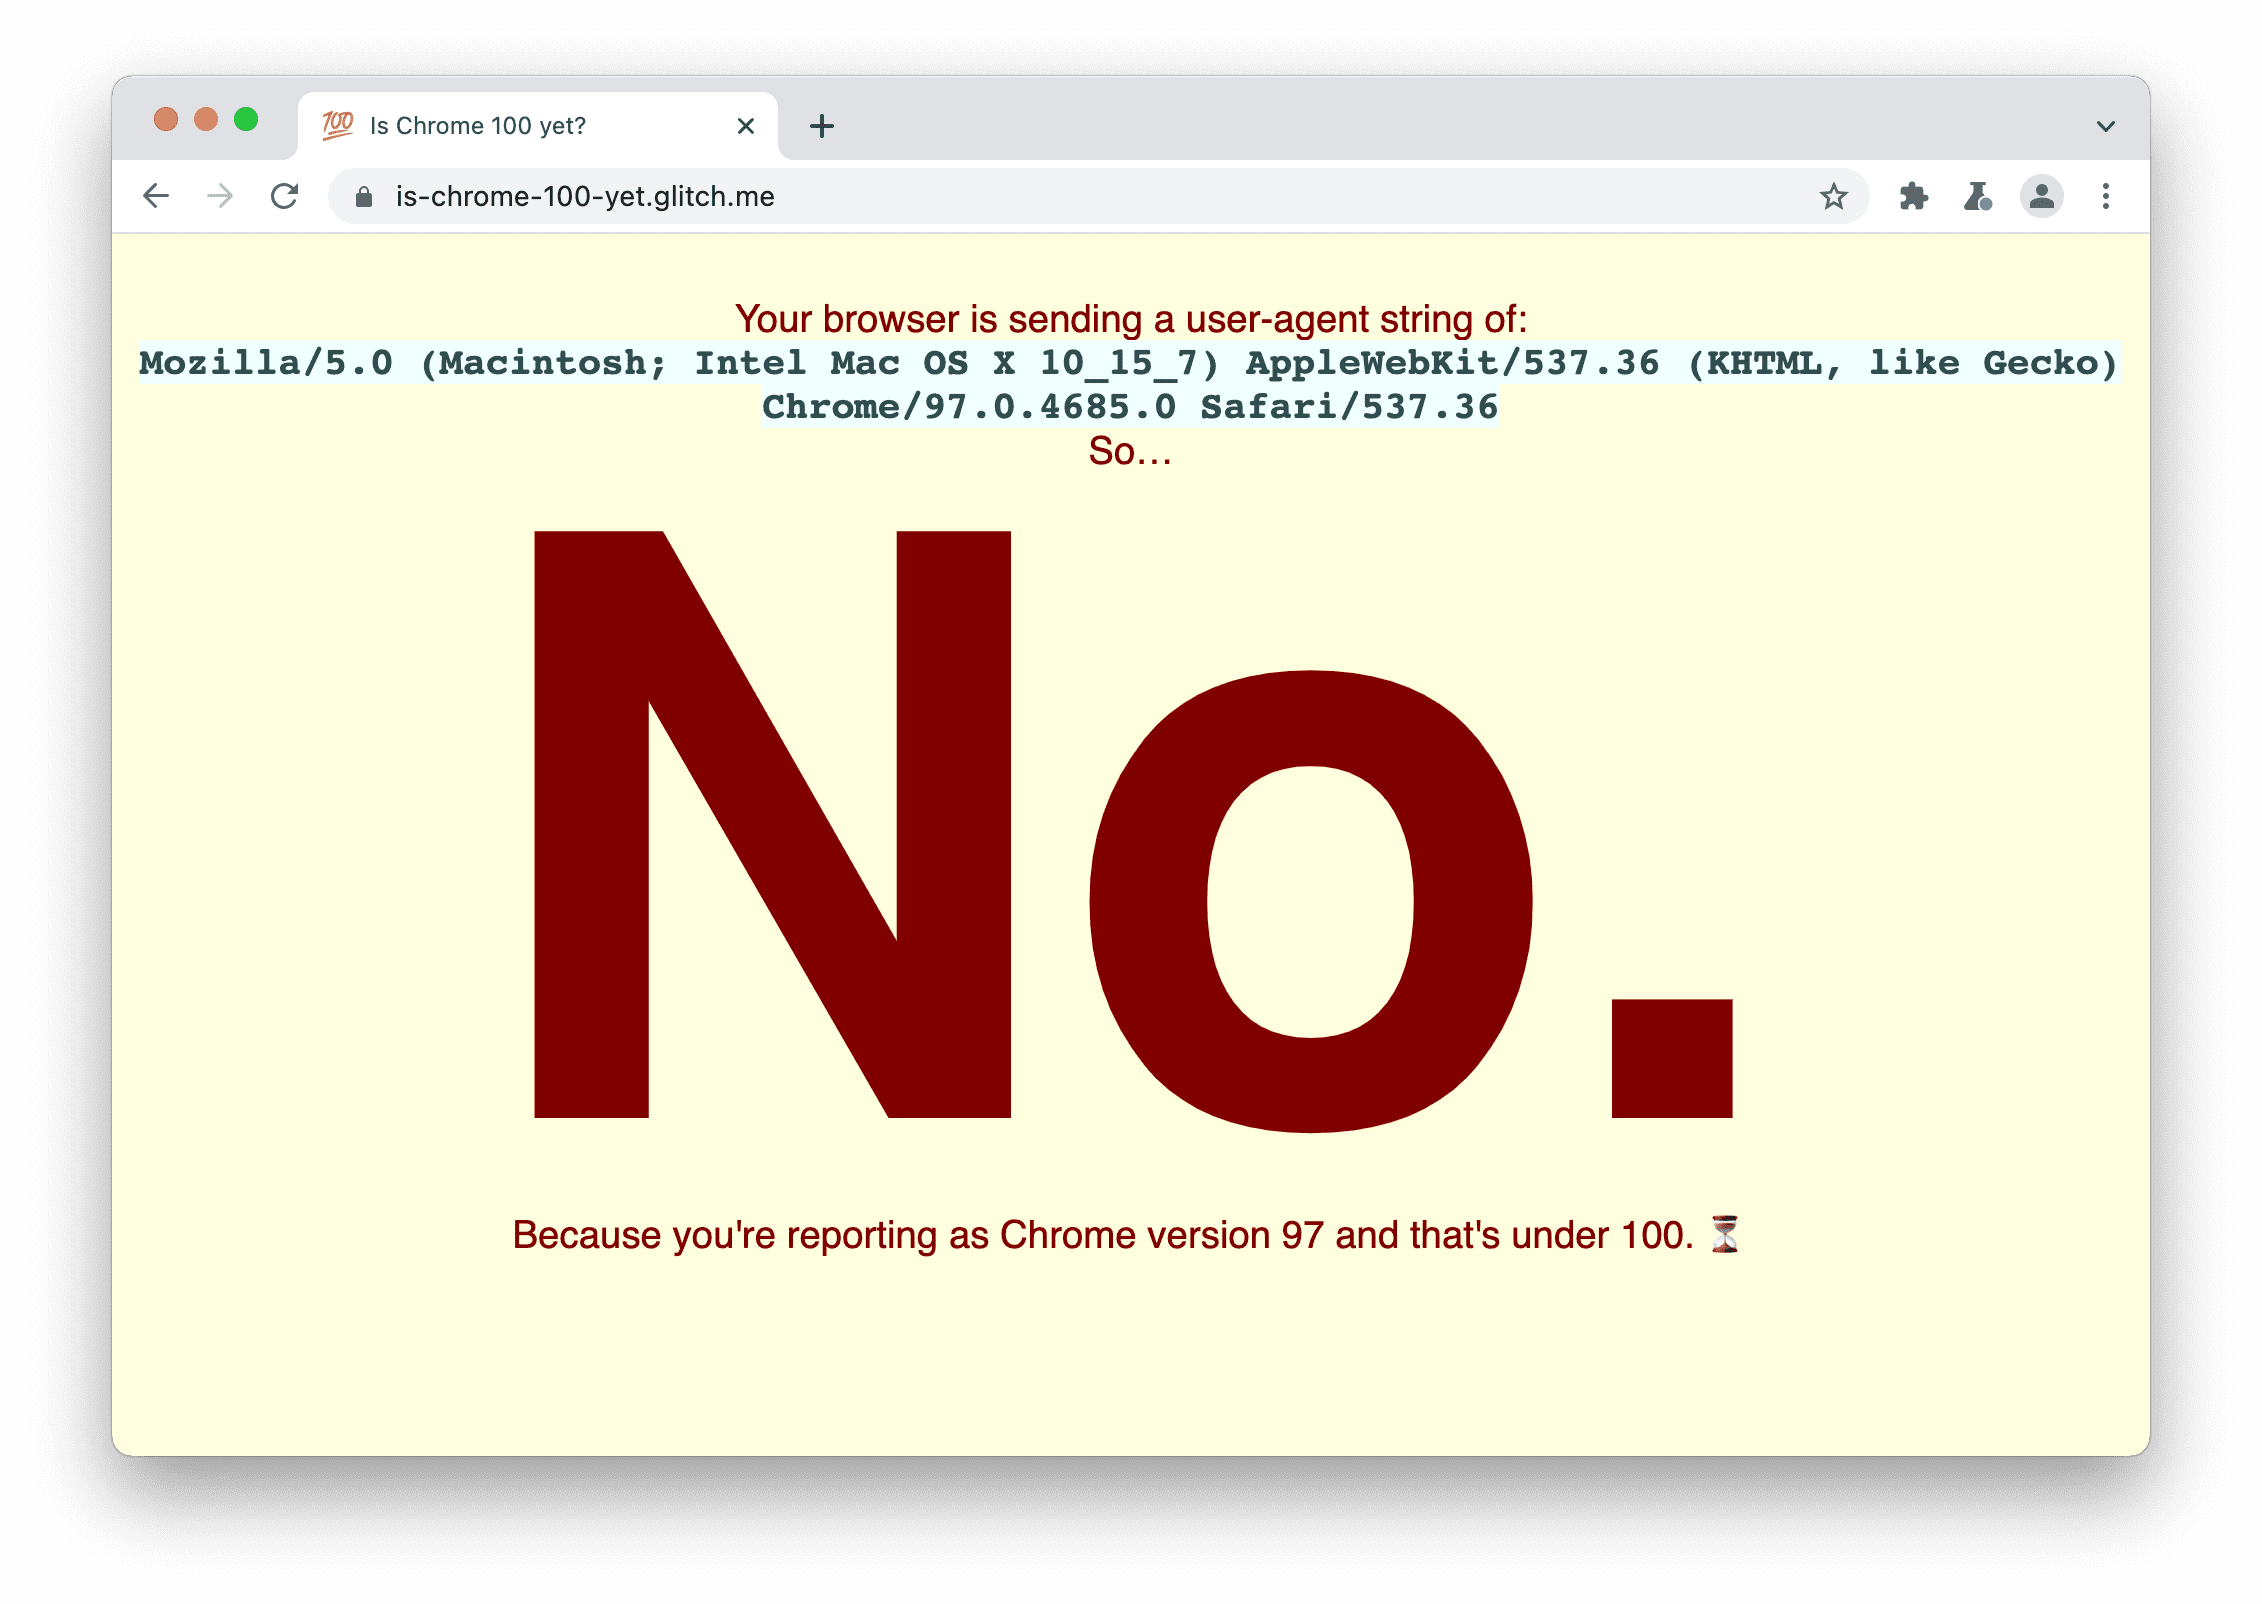 A site that checks if the browser is sending User-
Agent string 100. It displays: No, because you're reporting as Chrome version 97 and that's under 100.